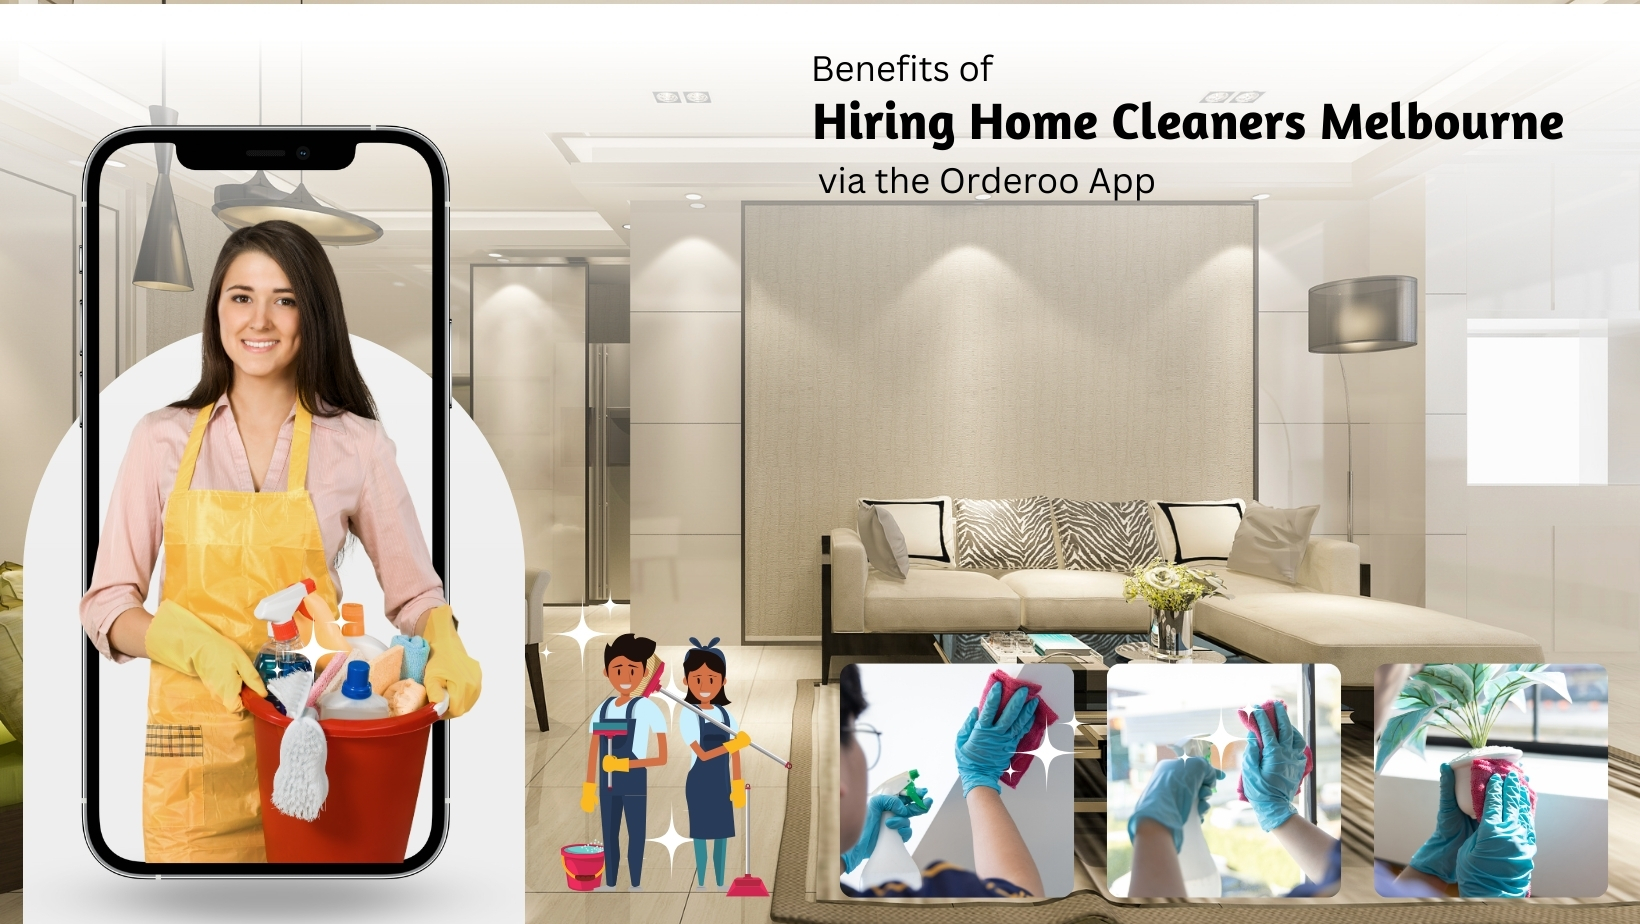 Benefits of Hiring Home Cleaners Melbourne via the Orderoo App